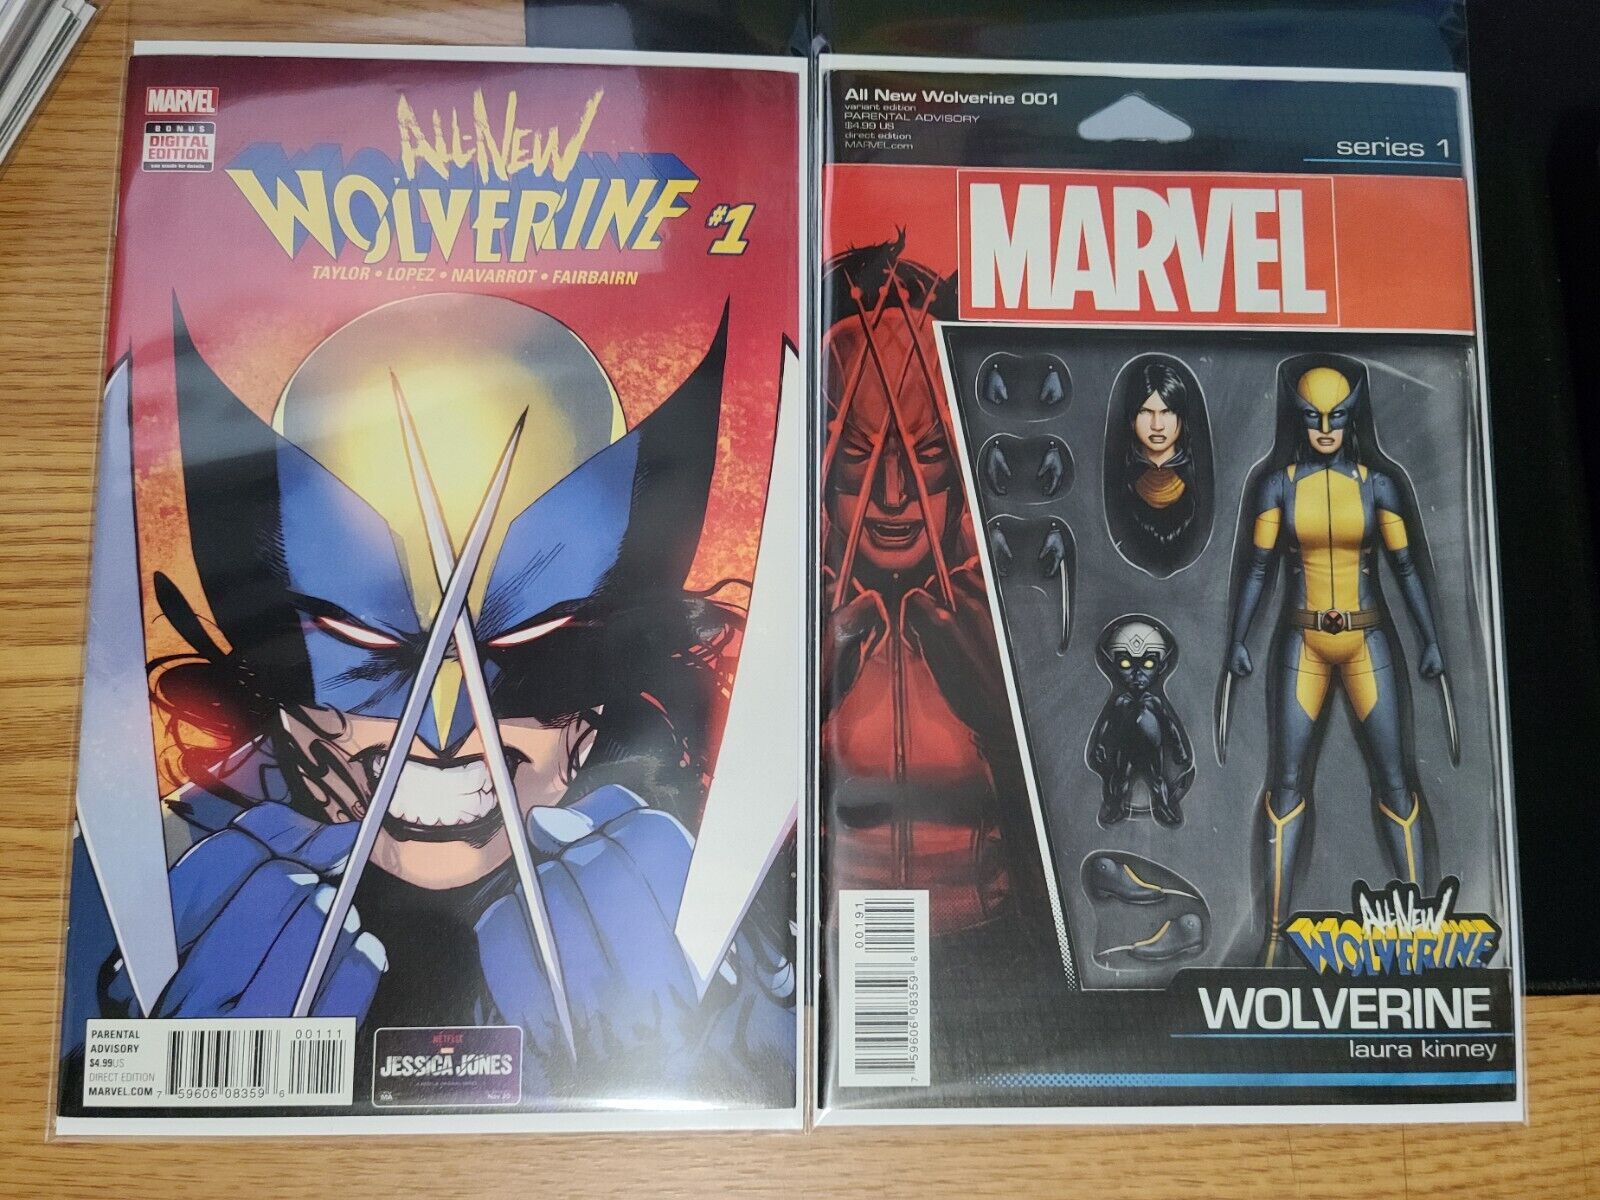 All-New Wolverine #1 Main Cover and Action Figure Variant Marvel Key Issue